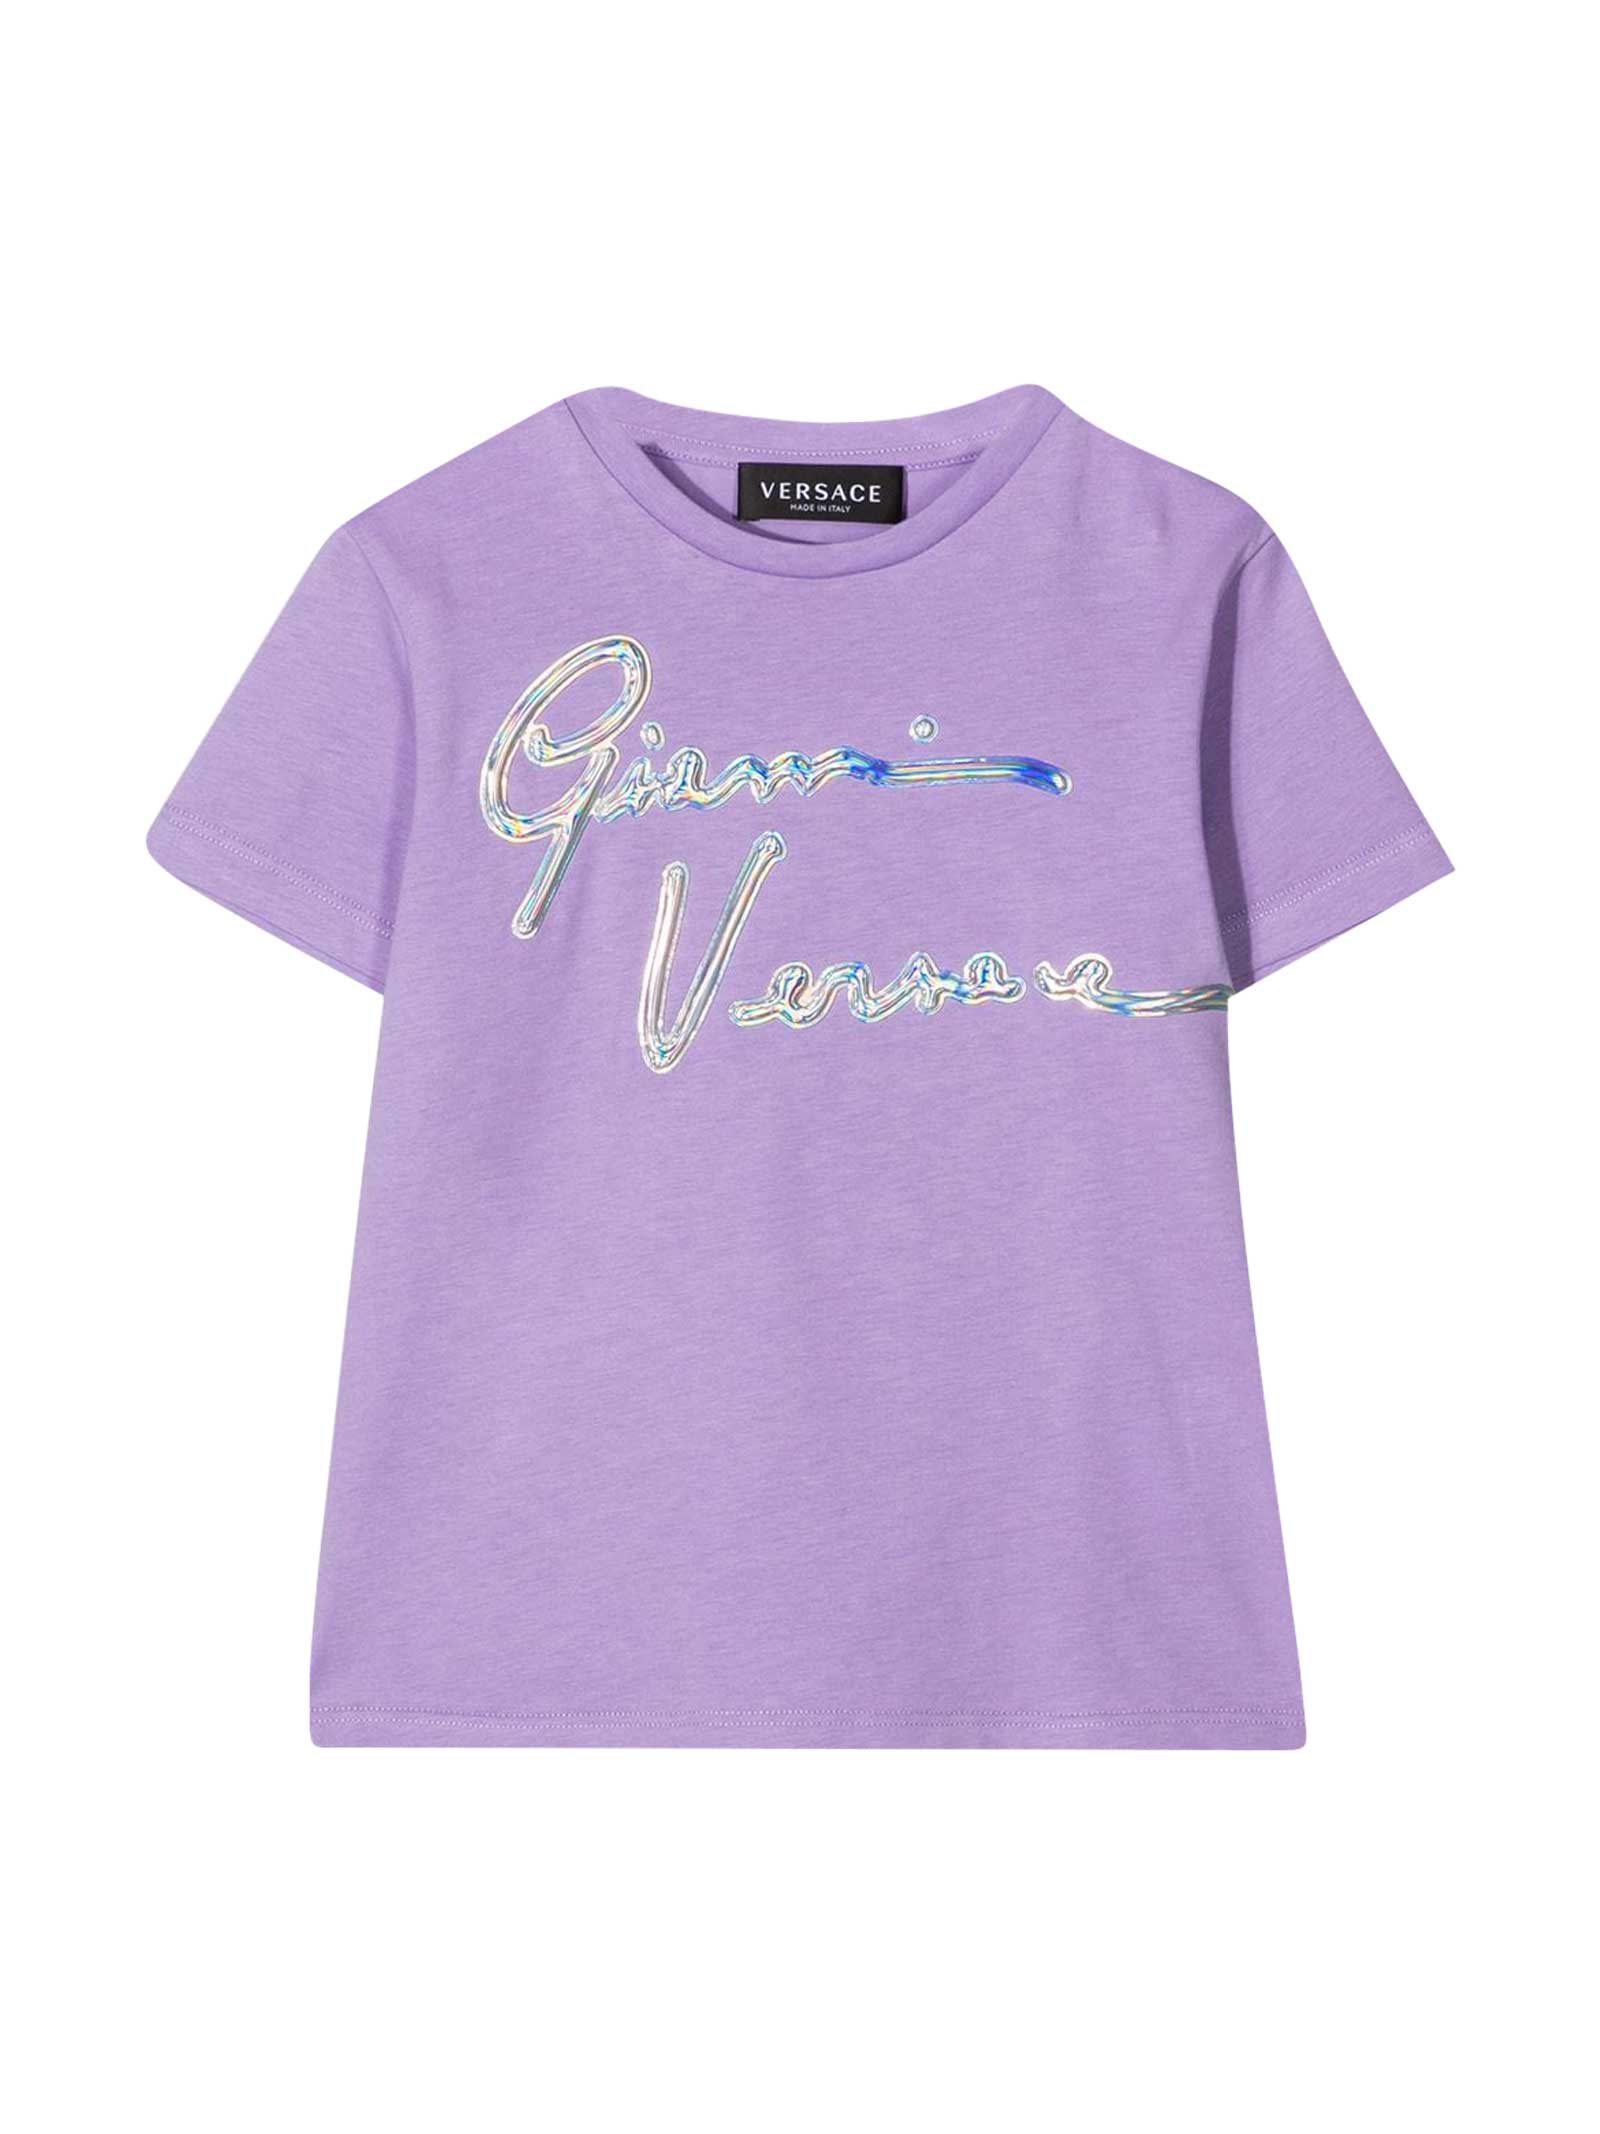 Versace Purple T-shirt With Frontal Silver Print Young